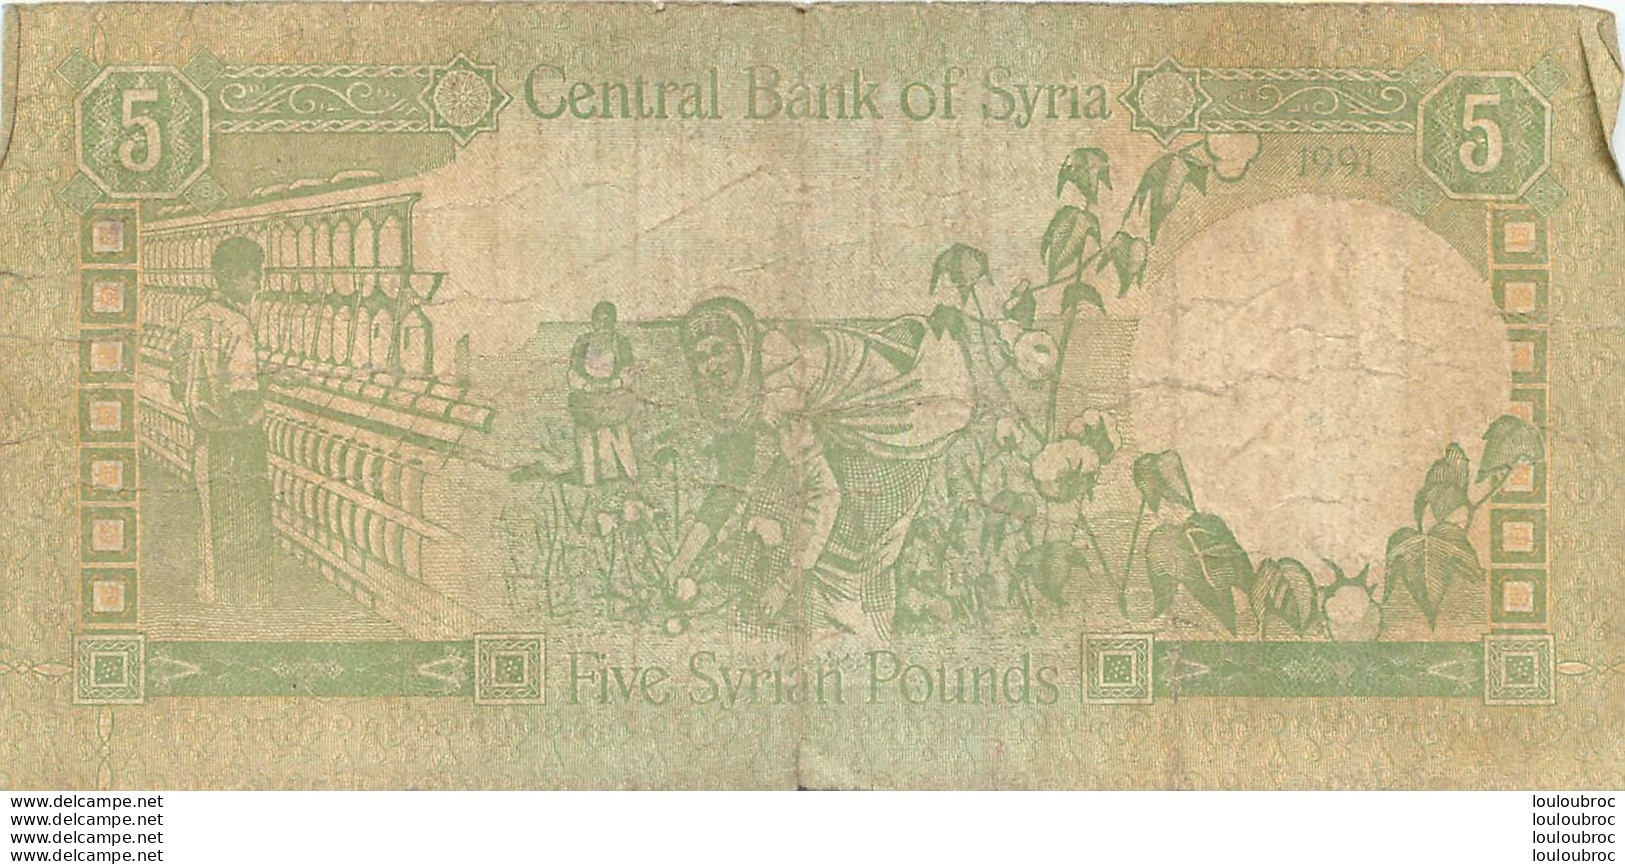 BILLET  SYRIE FIVE SYRIAN POUNDS - Syria